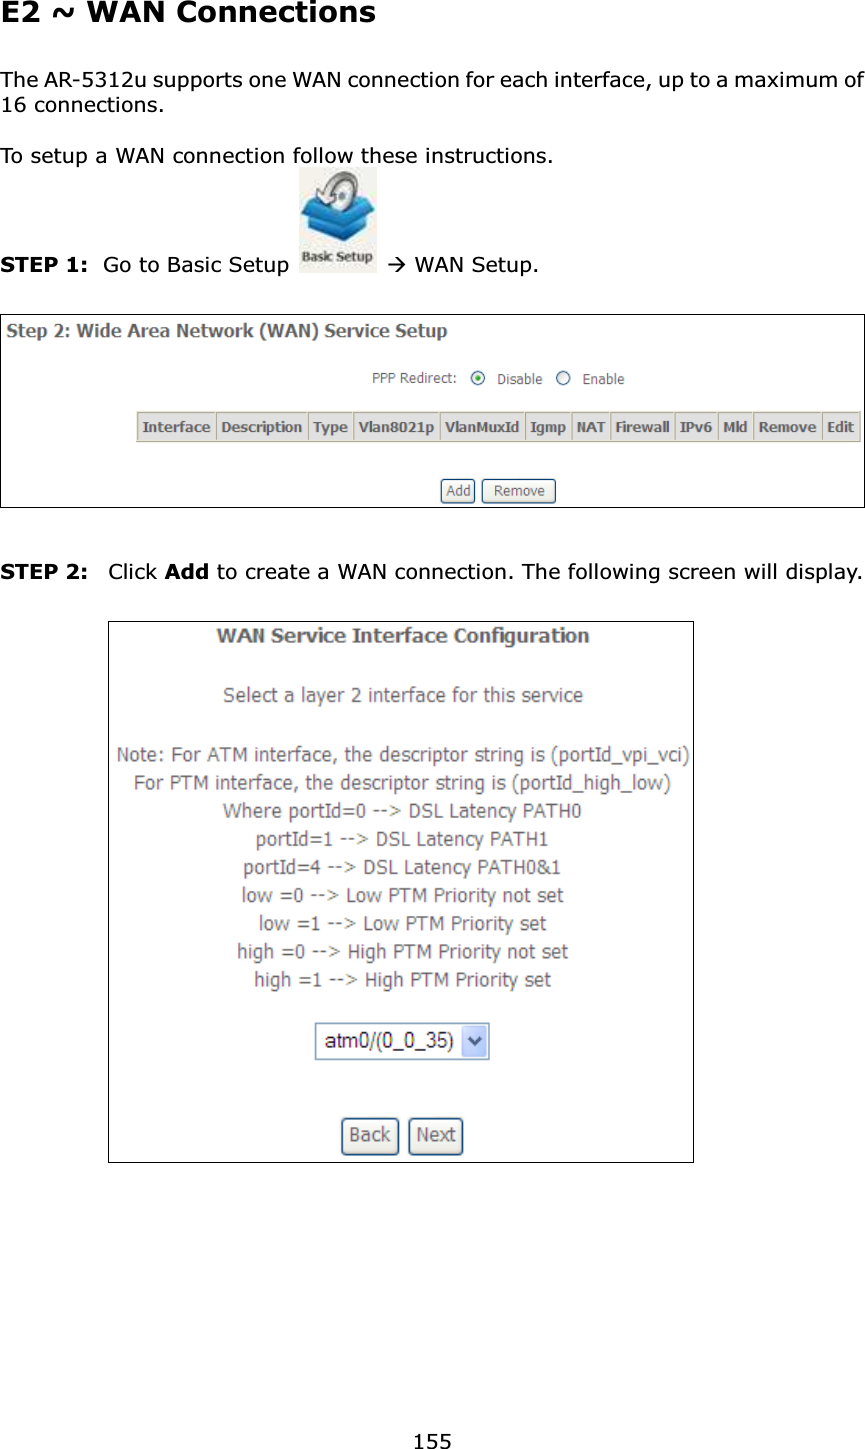  155E2 ~ WAN Connections The AR-5312u supports one WAN connection for each interface, up to a maximum of 16 connections.  To setup a WAN connection follow these instructions. STEP 1:  Go to Basic Setup    WAN Setup.    STEP 2:  Click Add to create a WAN connection. The following screen will display.    